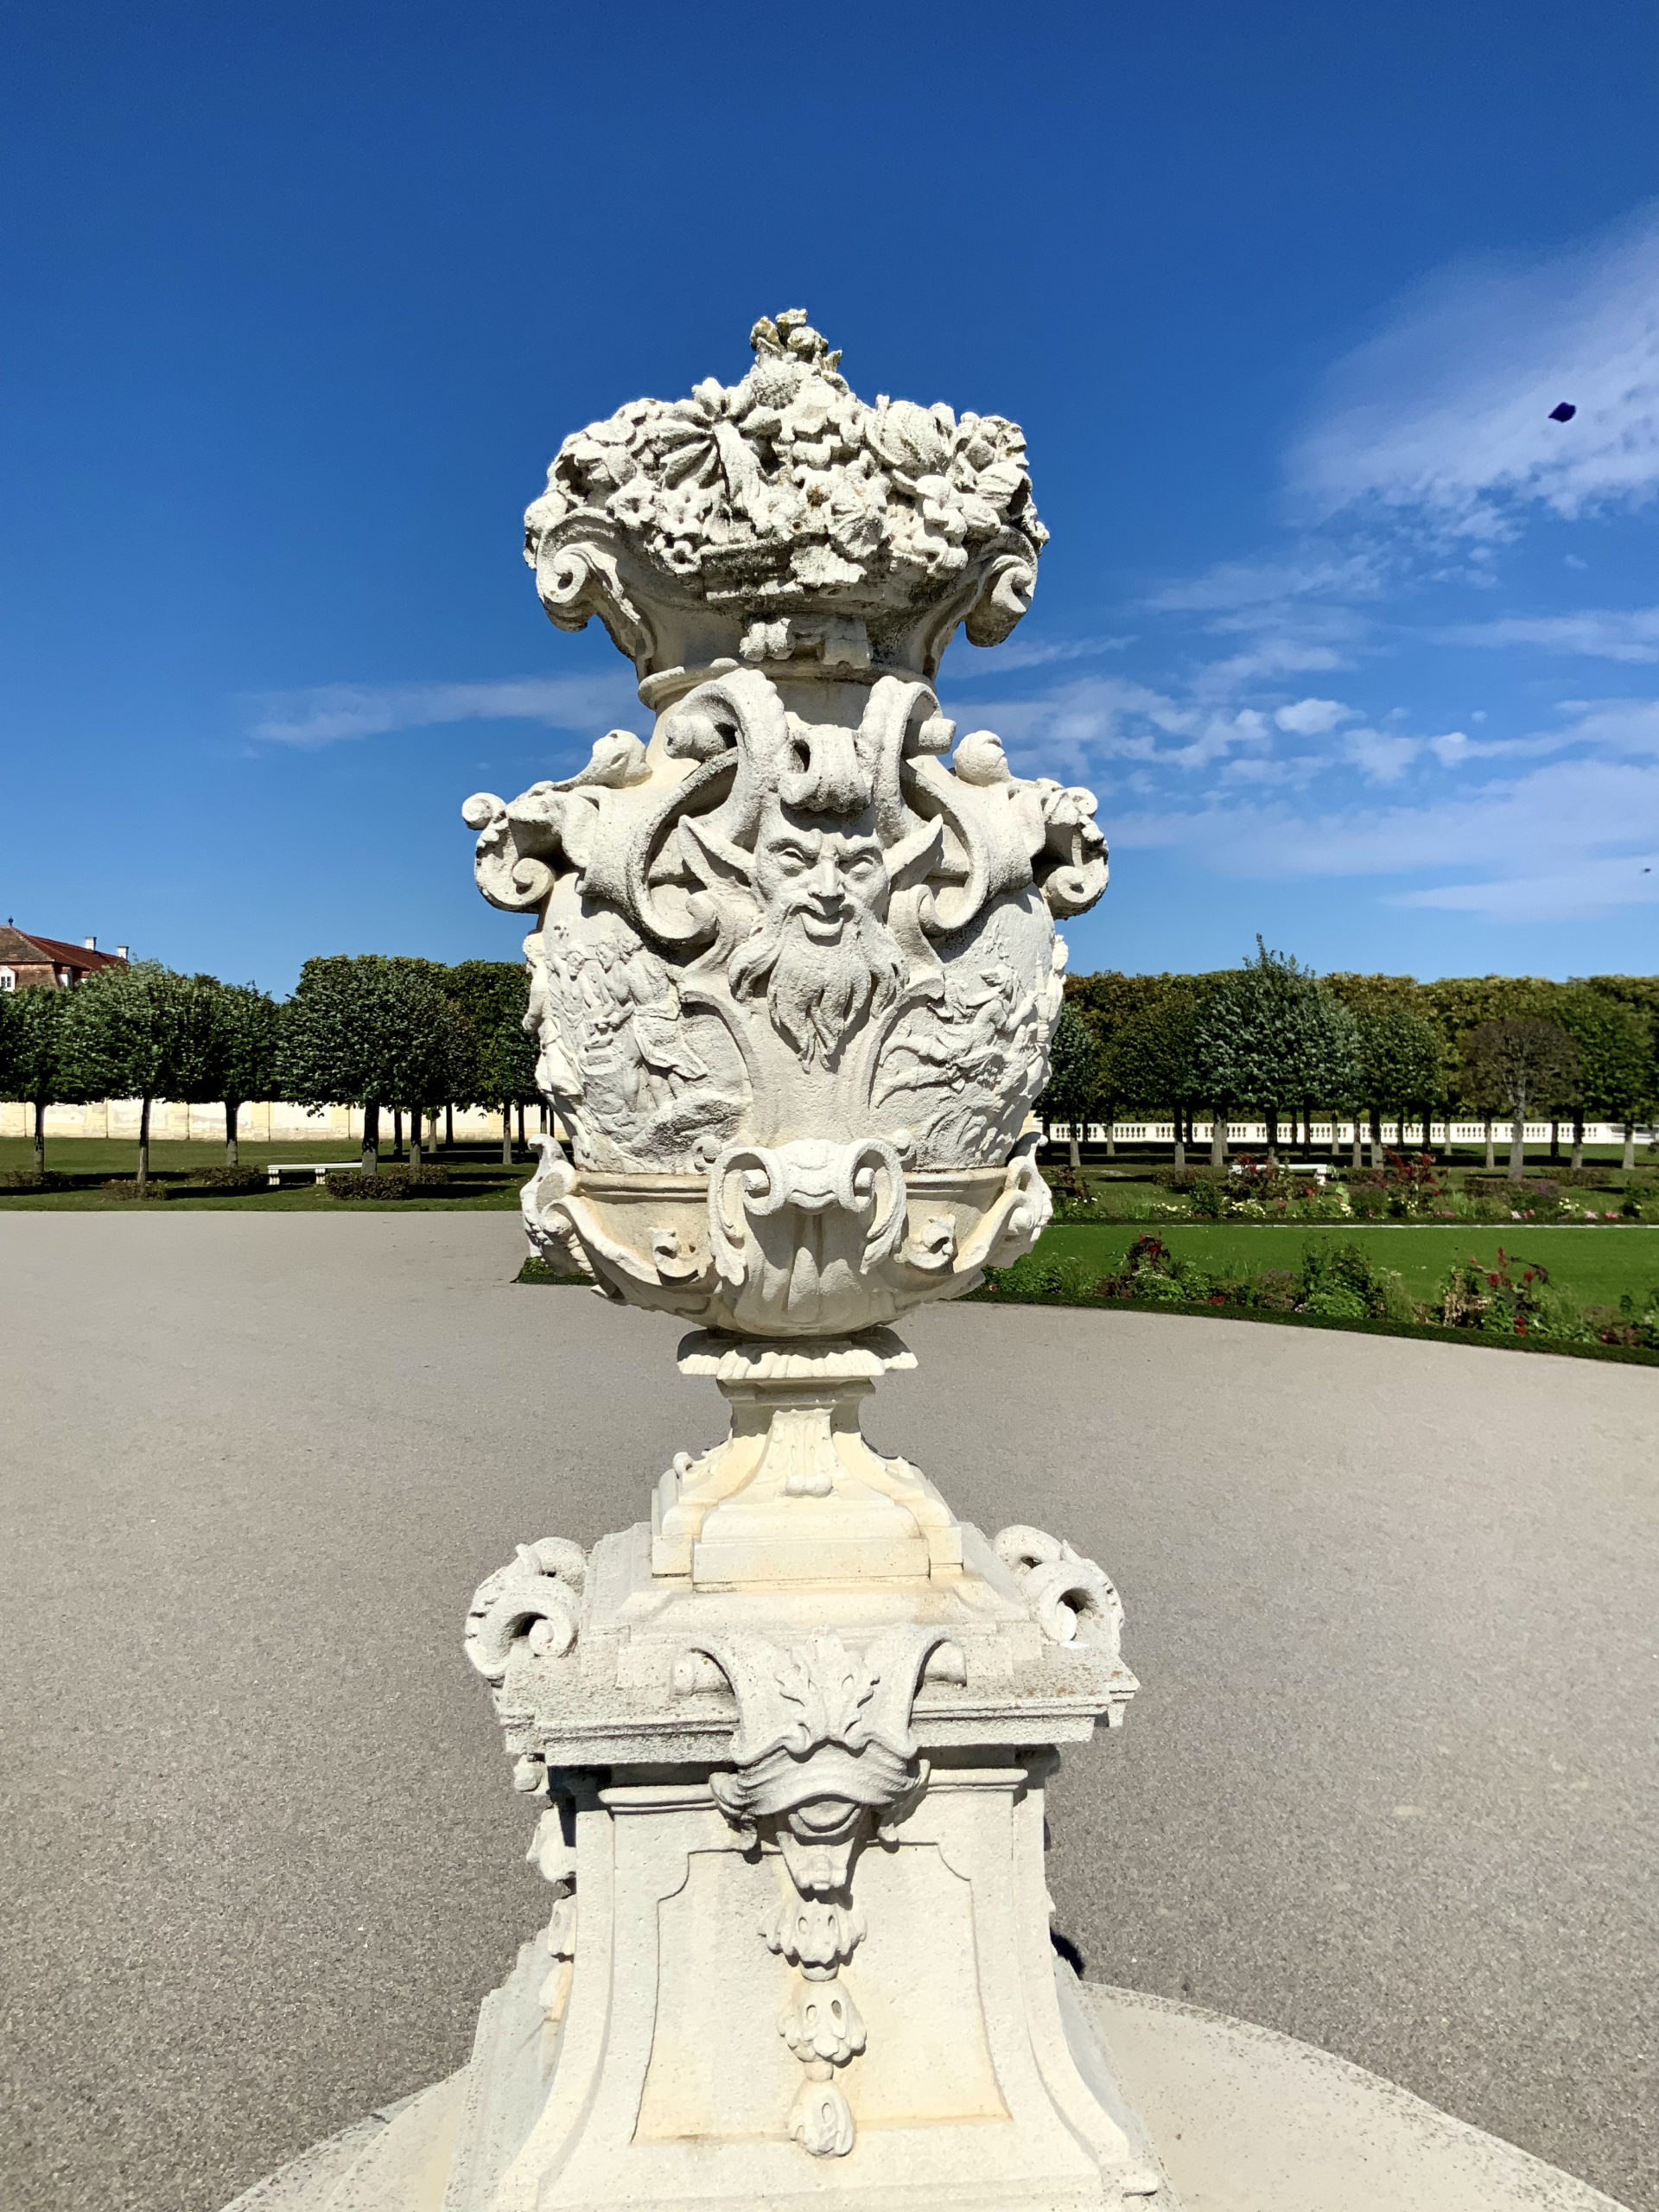 sculpture in the gardens of Hof Palace